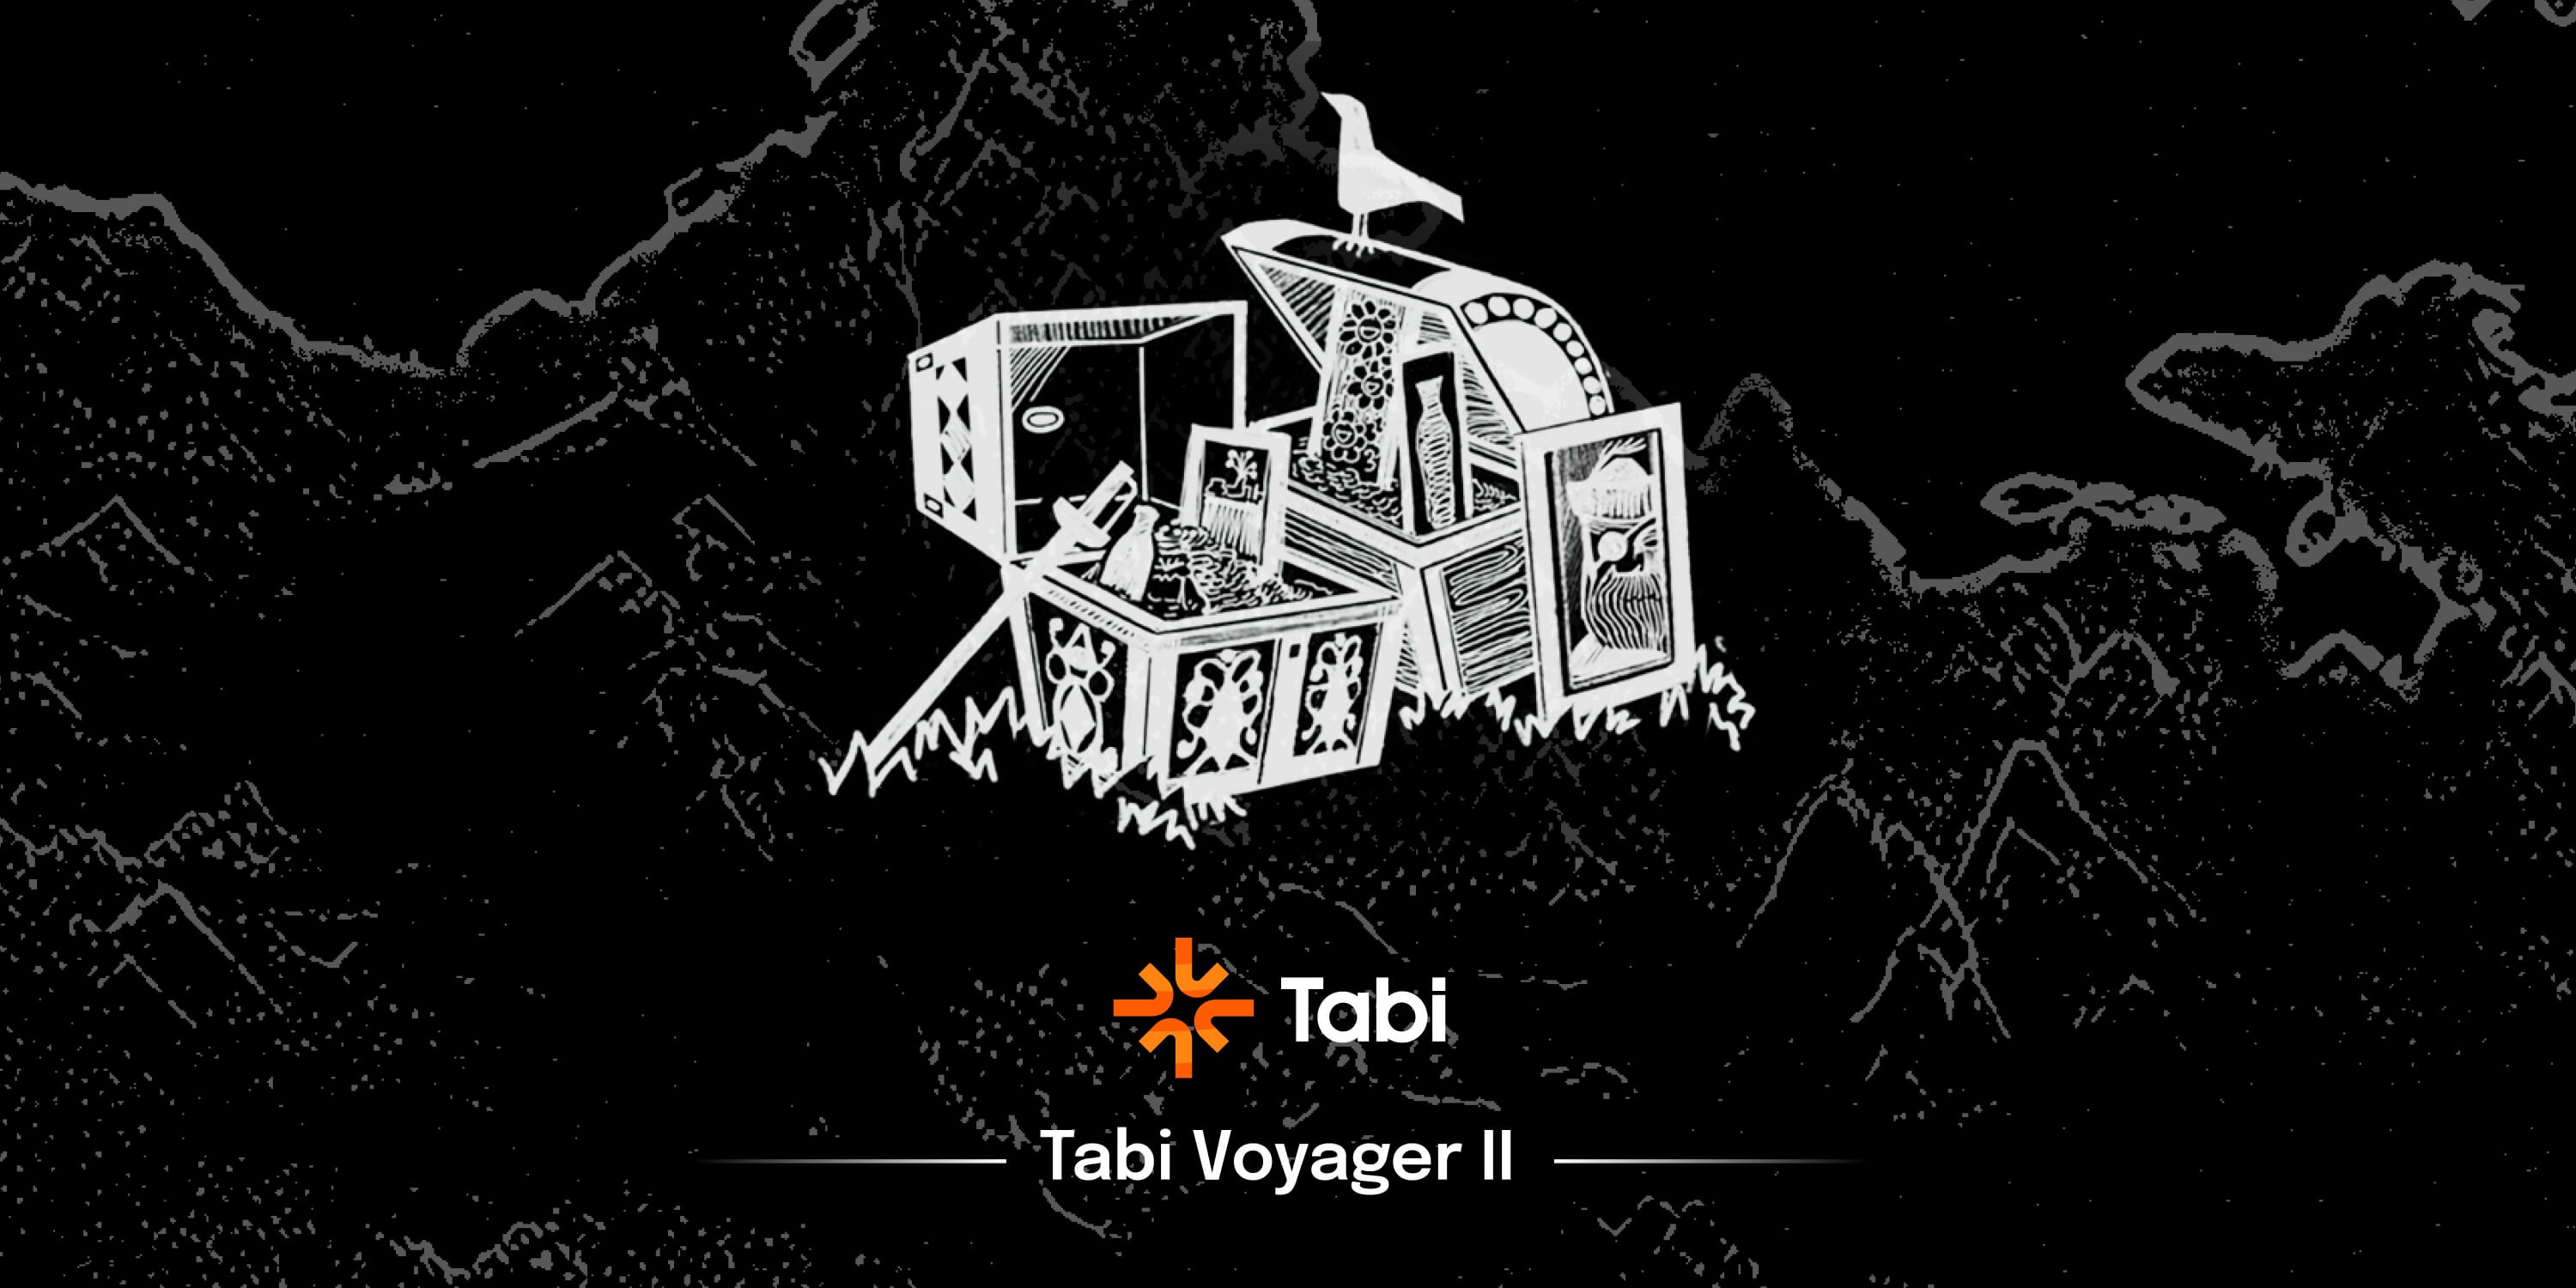 The new challenge on the Tabi test network (Voyage II) has commenced! Captains and sailors, waste no time and embark swiftly to Pirate Island to claim your rightful treasures!